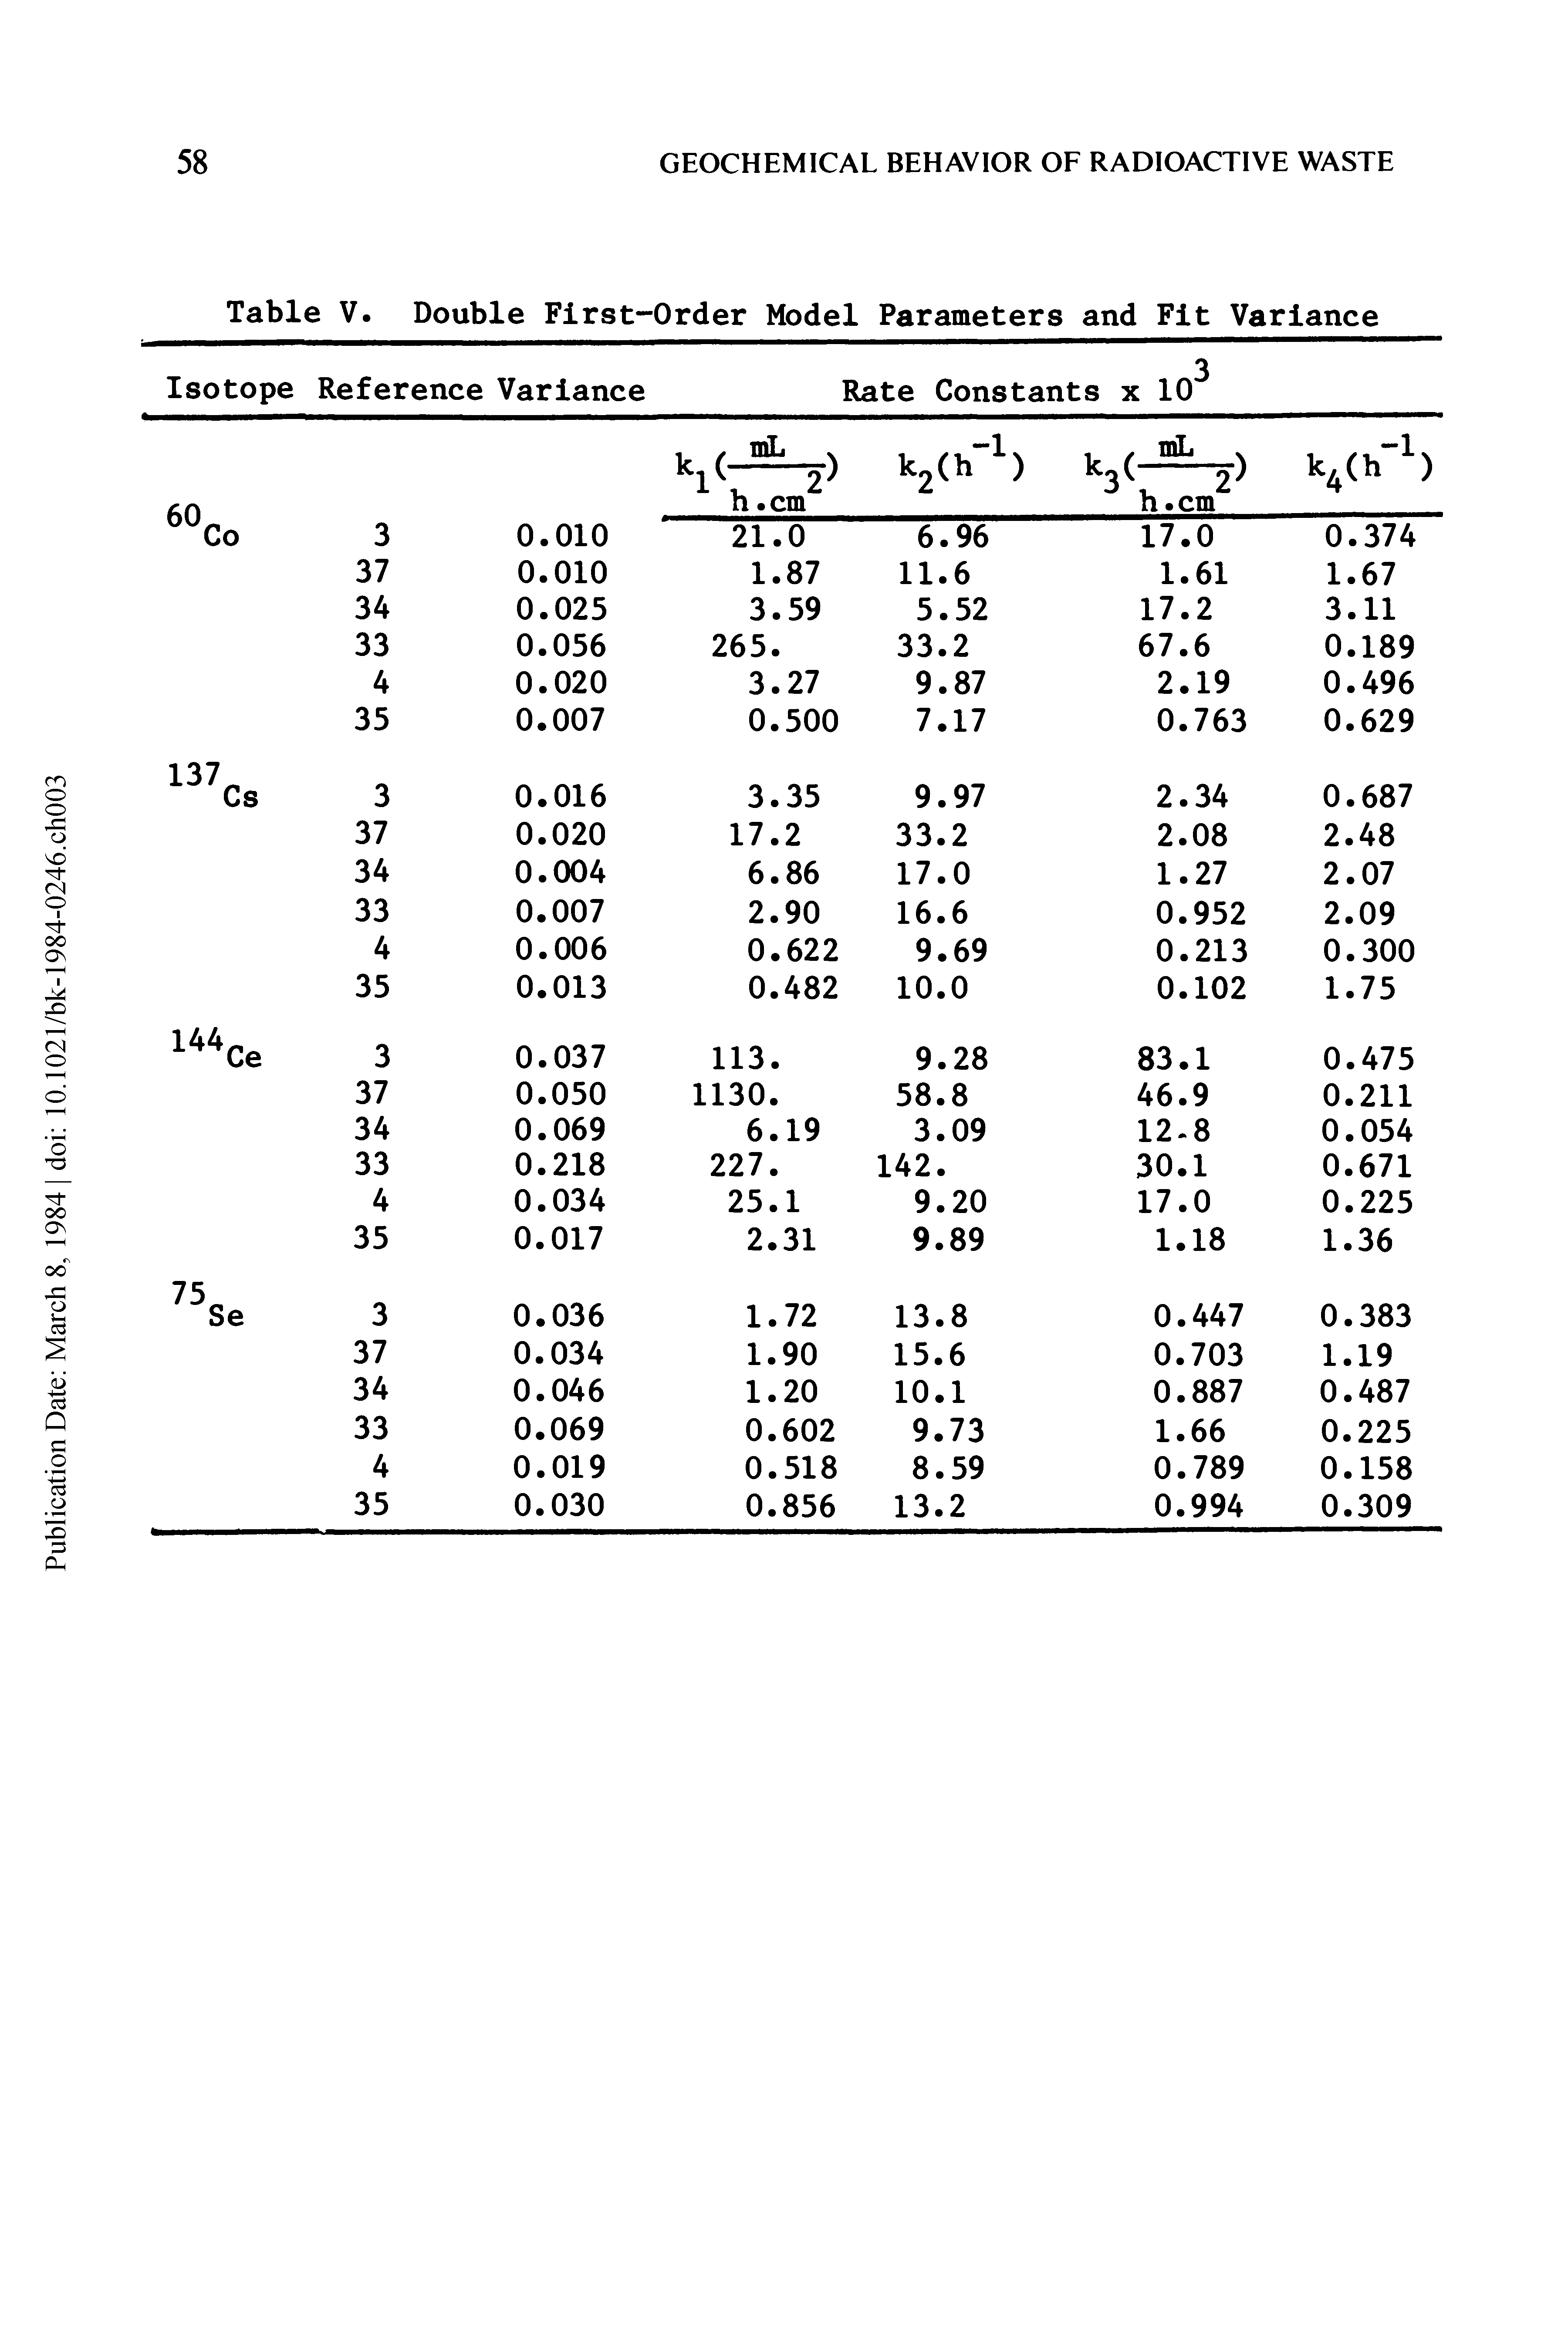 Table V. Double First- Order Model Parameters and Fit Variance ...